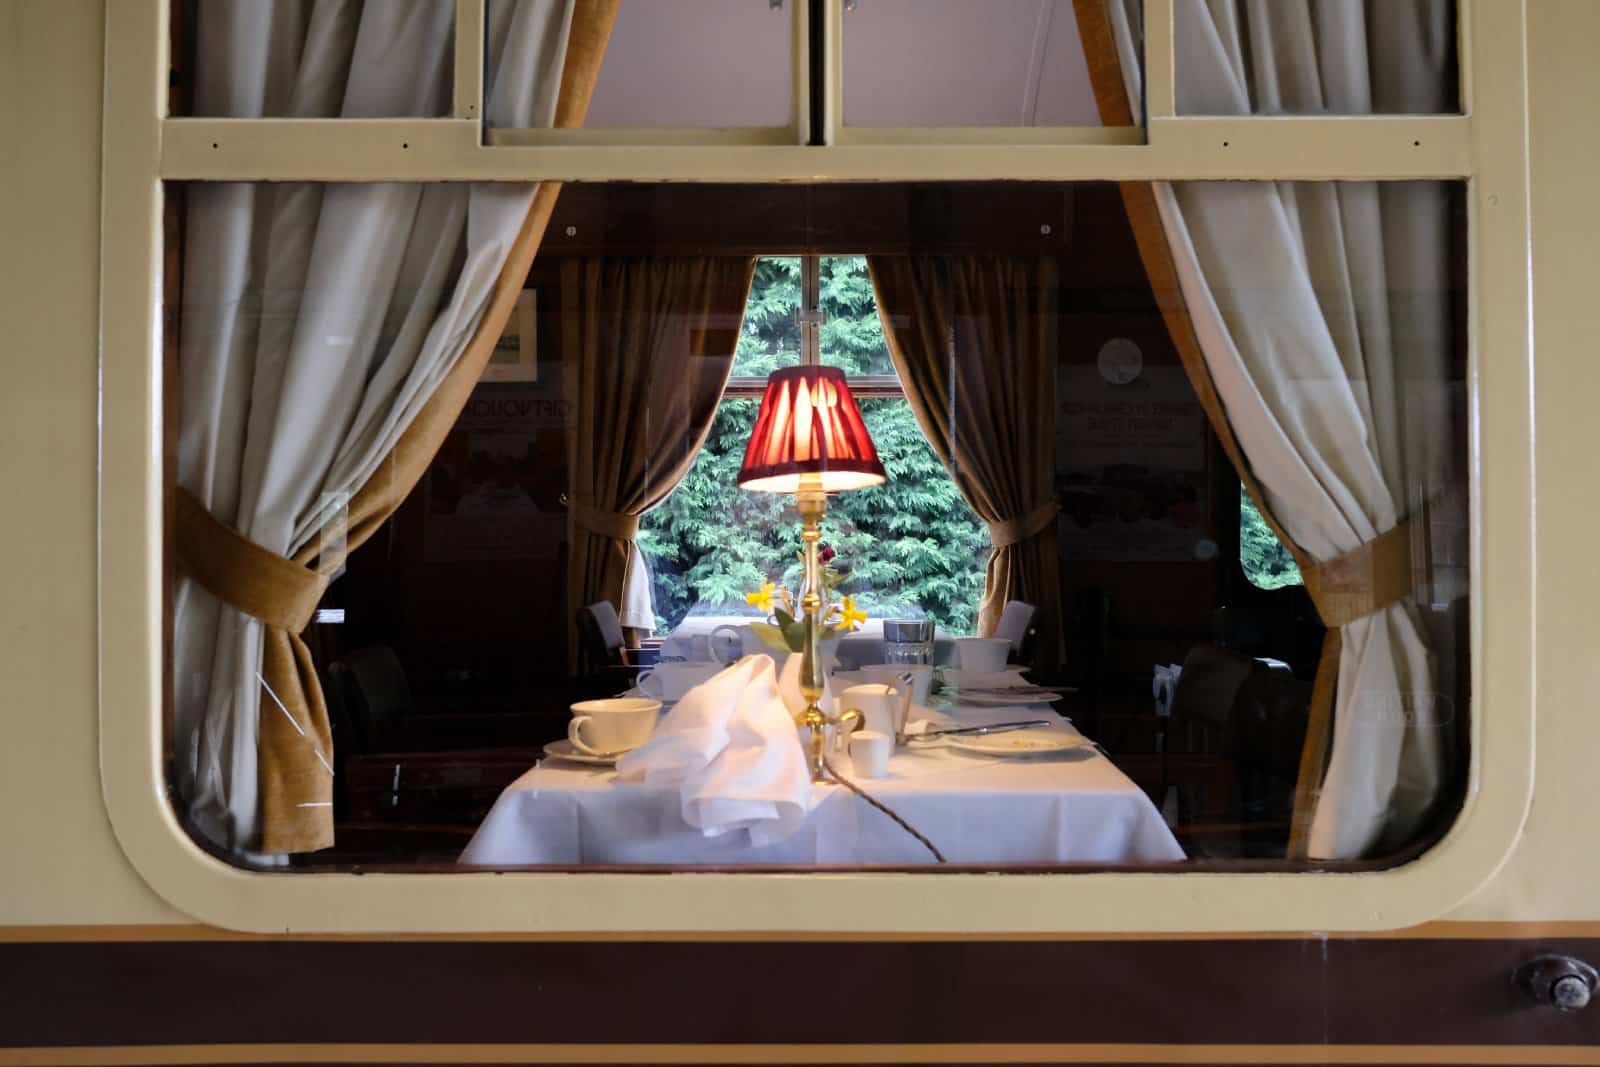 <p class="wp-caption-text">Image Credit: Shutterstock / Nick Beer</p>  <p><span>Passengers can expect sumptuous dining, with meals prepared by skilled chefs using the finest local ingredients, served in the train’s elegant dining cars. The attention to detail in the service and the exquisite interior design of the cabins ensure a journey that is as comfortable as it is visually stunning.</span></p>